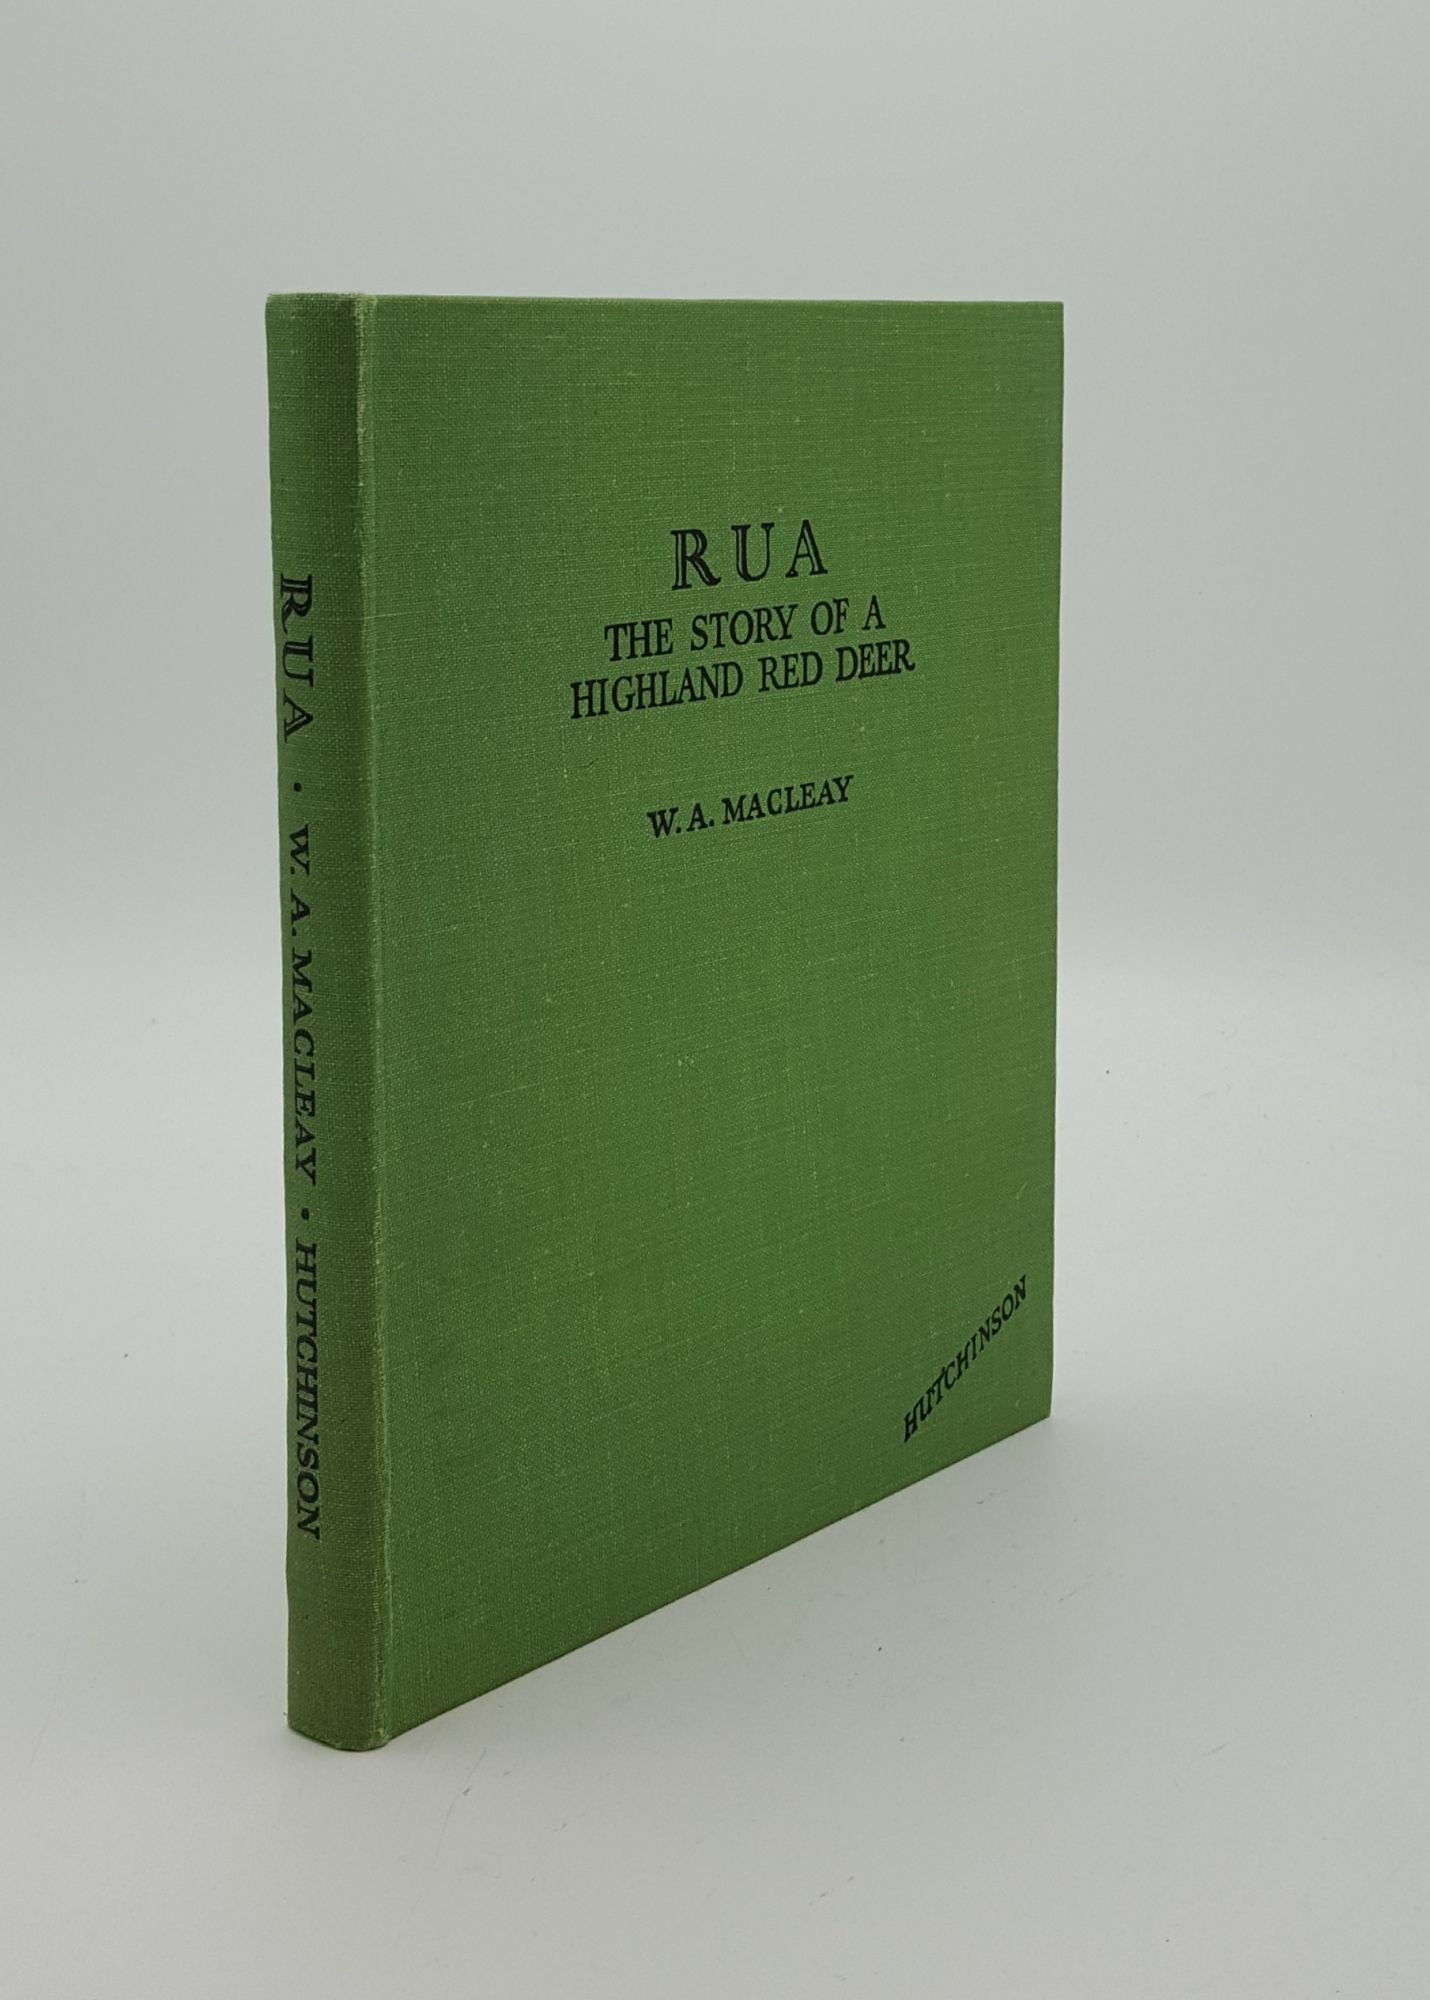 MacLEAY W. A., WALLACE Frank - Rua the Story of a Highland Red Deer